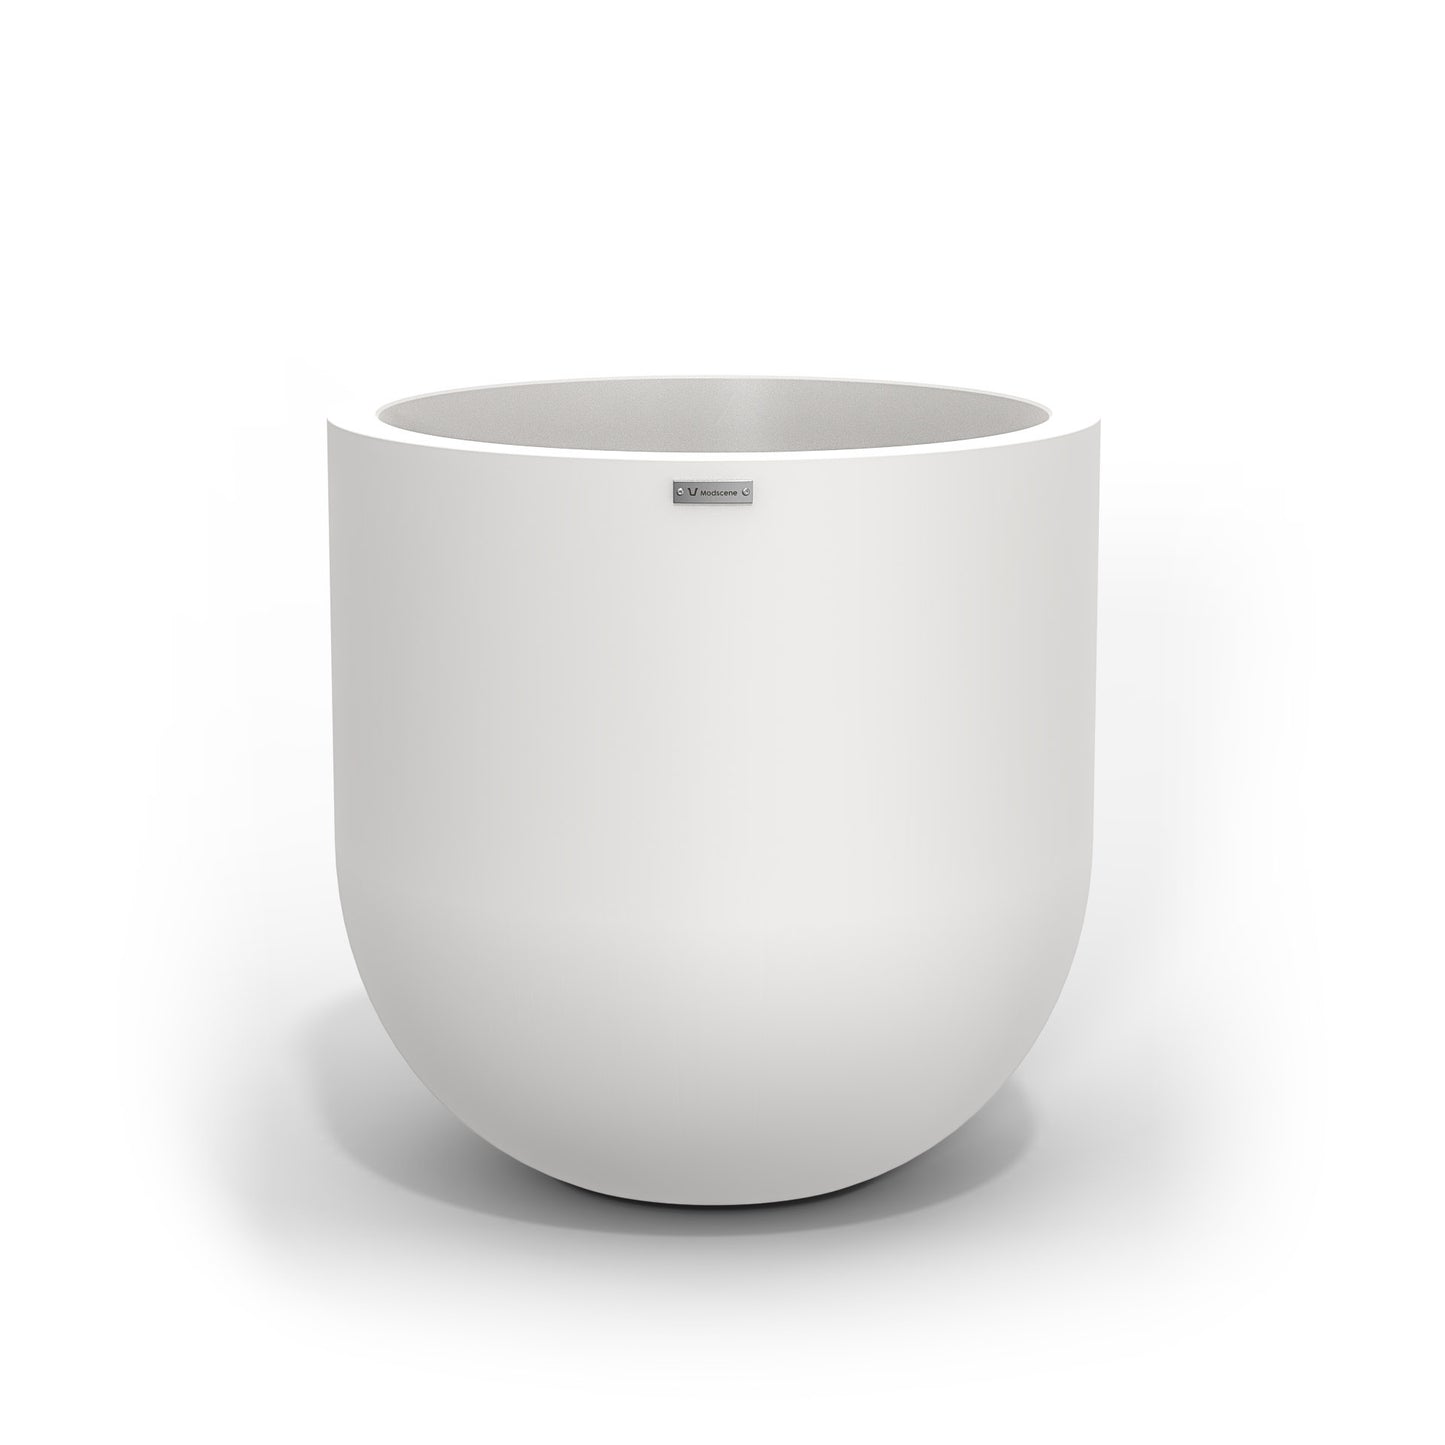 Large Modscene planter pot in a white colour. NZ made